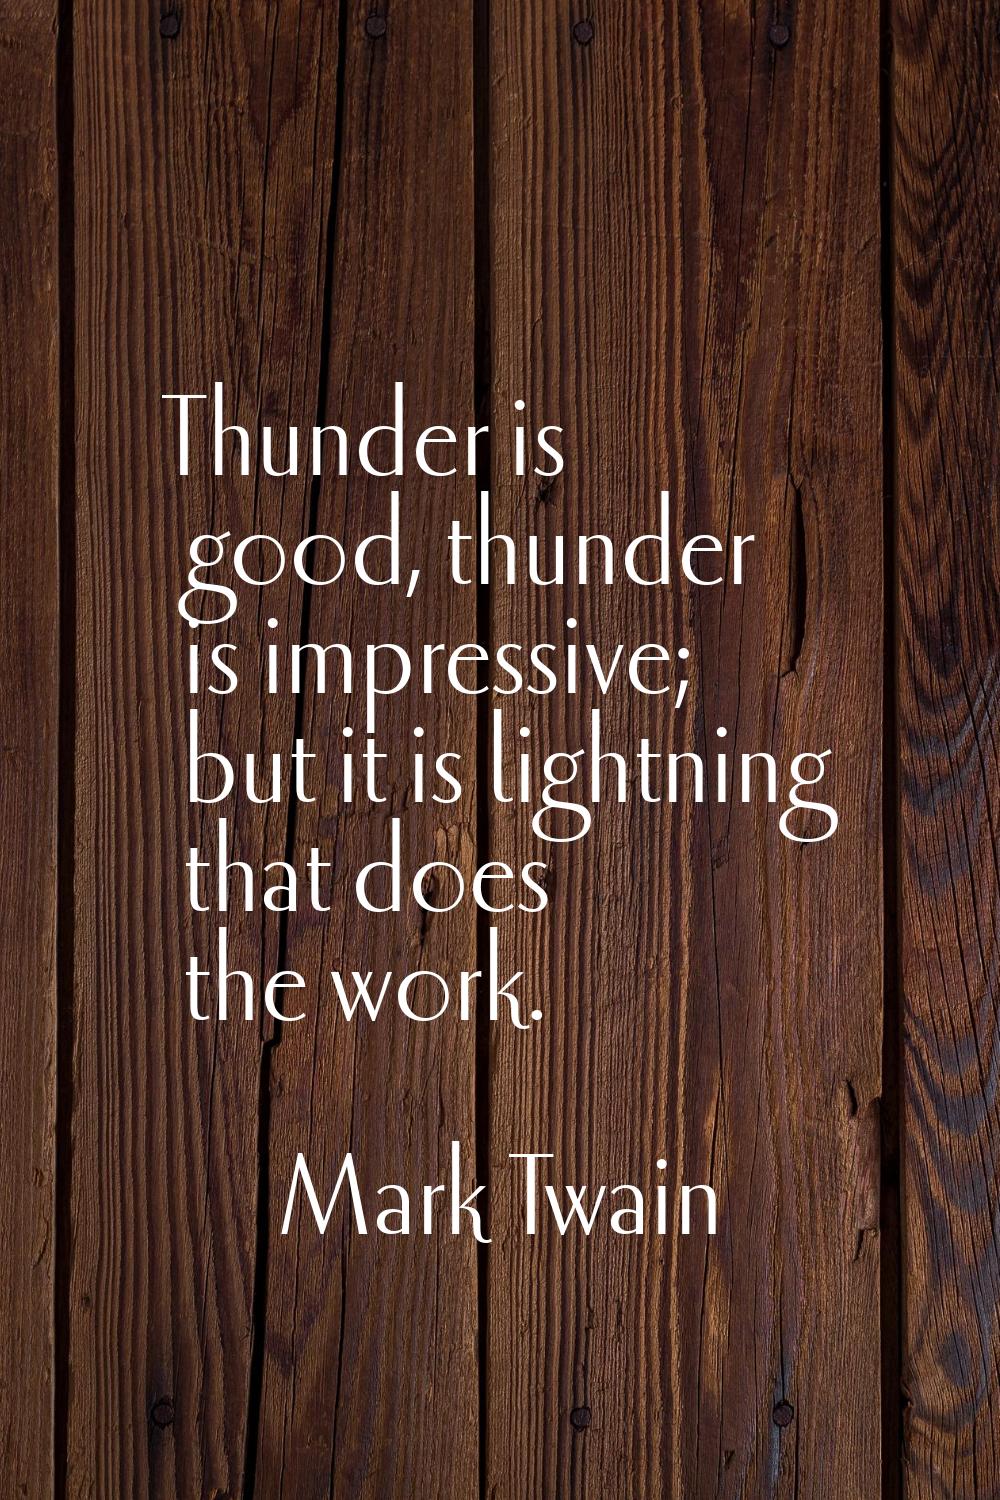 Thunder is good, thunder is impressive; but it is lightning that does the work.